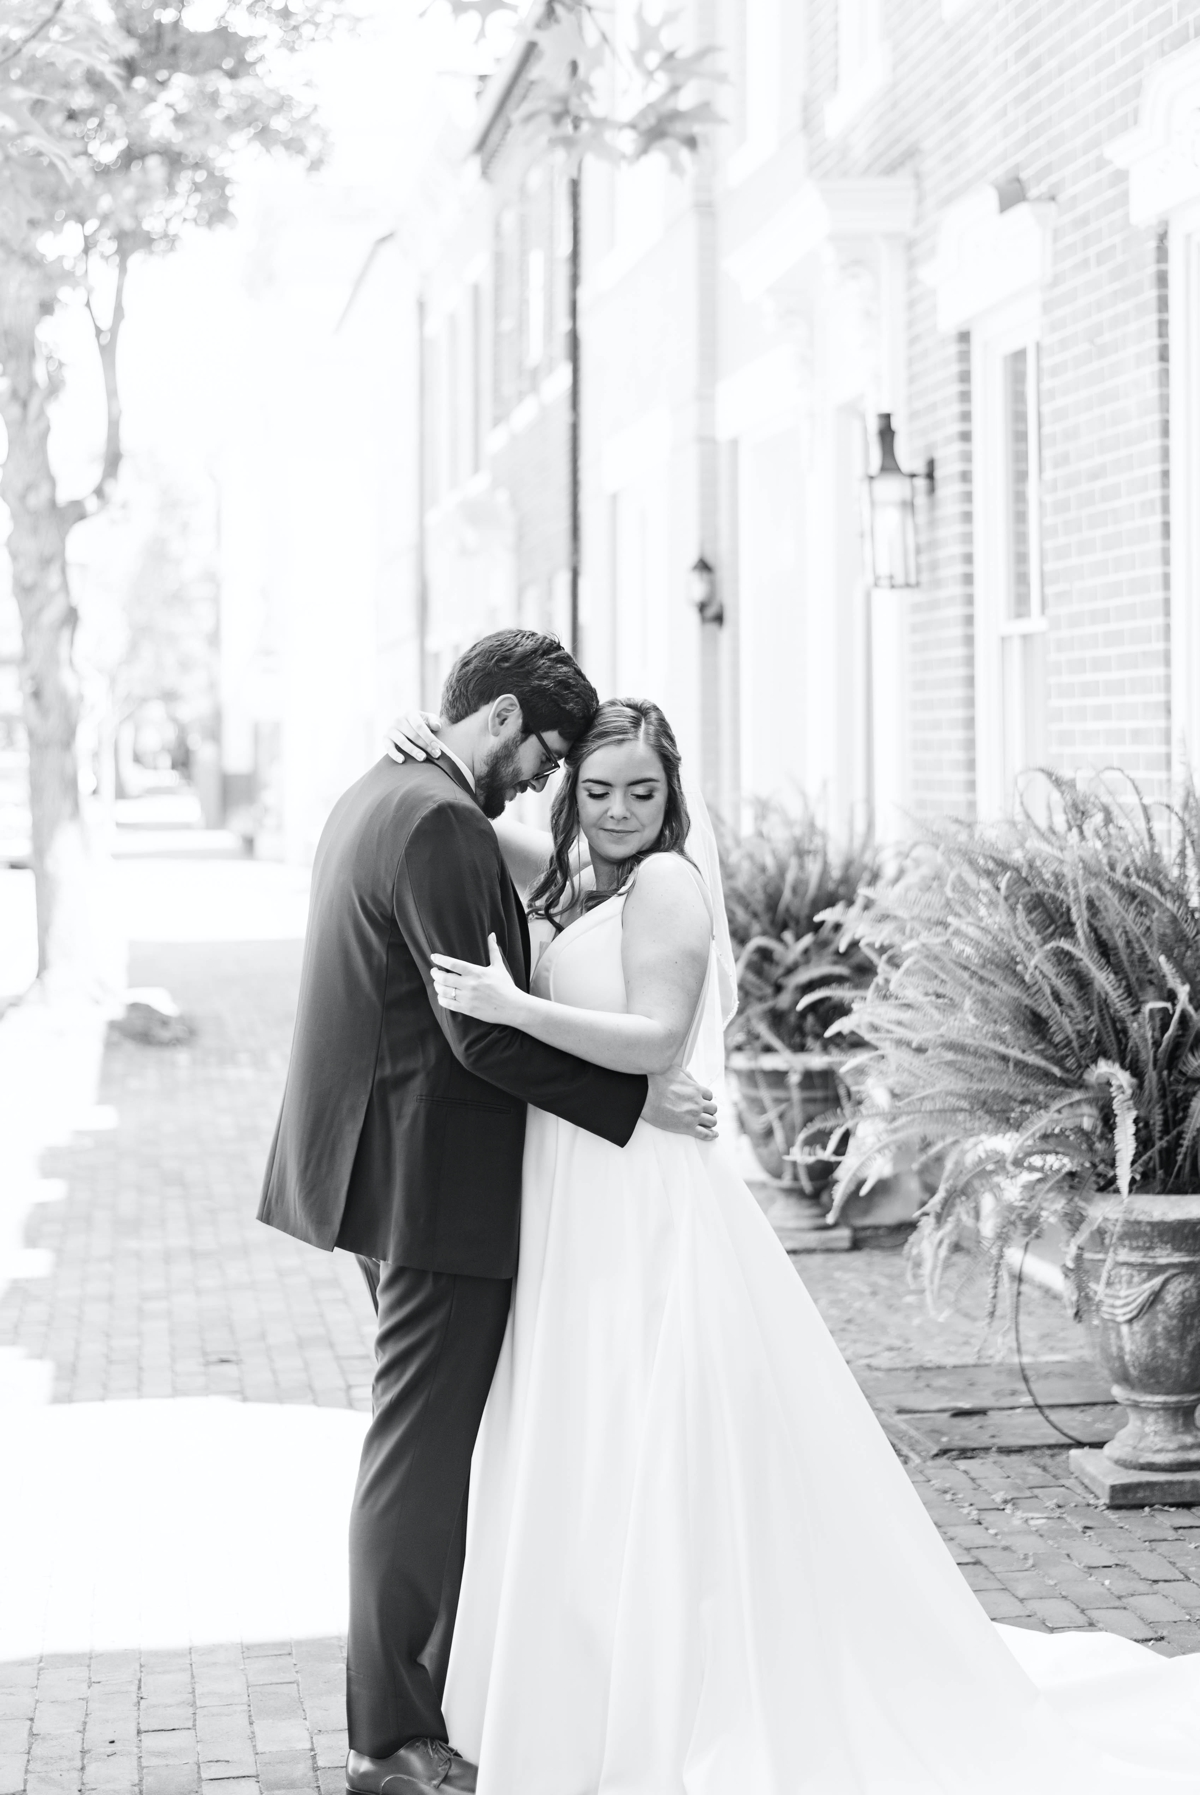 Jessica and Seamus embracing as bride and groom, wedding photography done in Alexandria Virginia